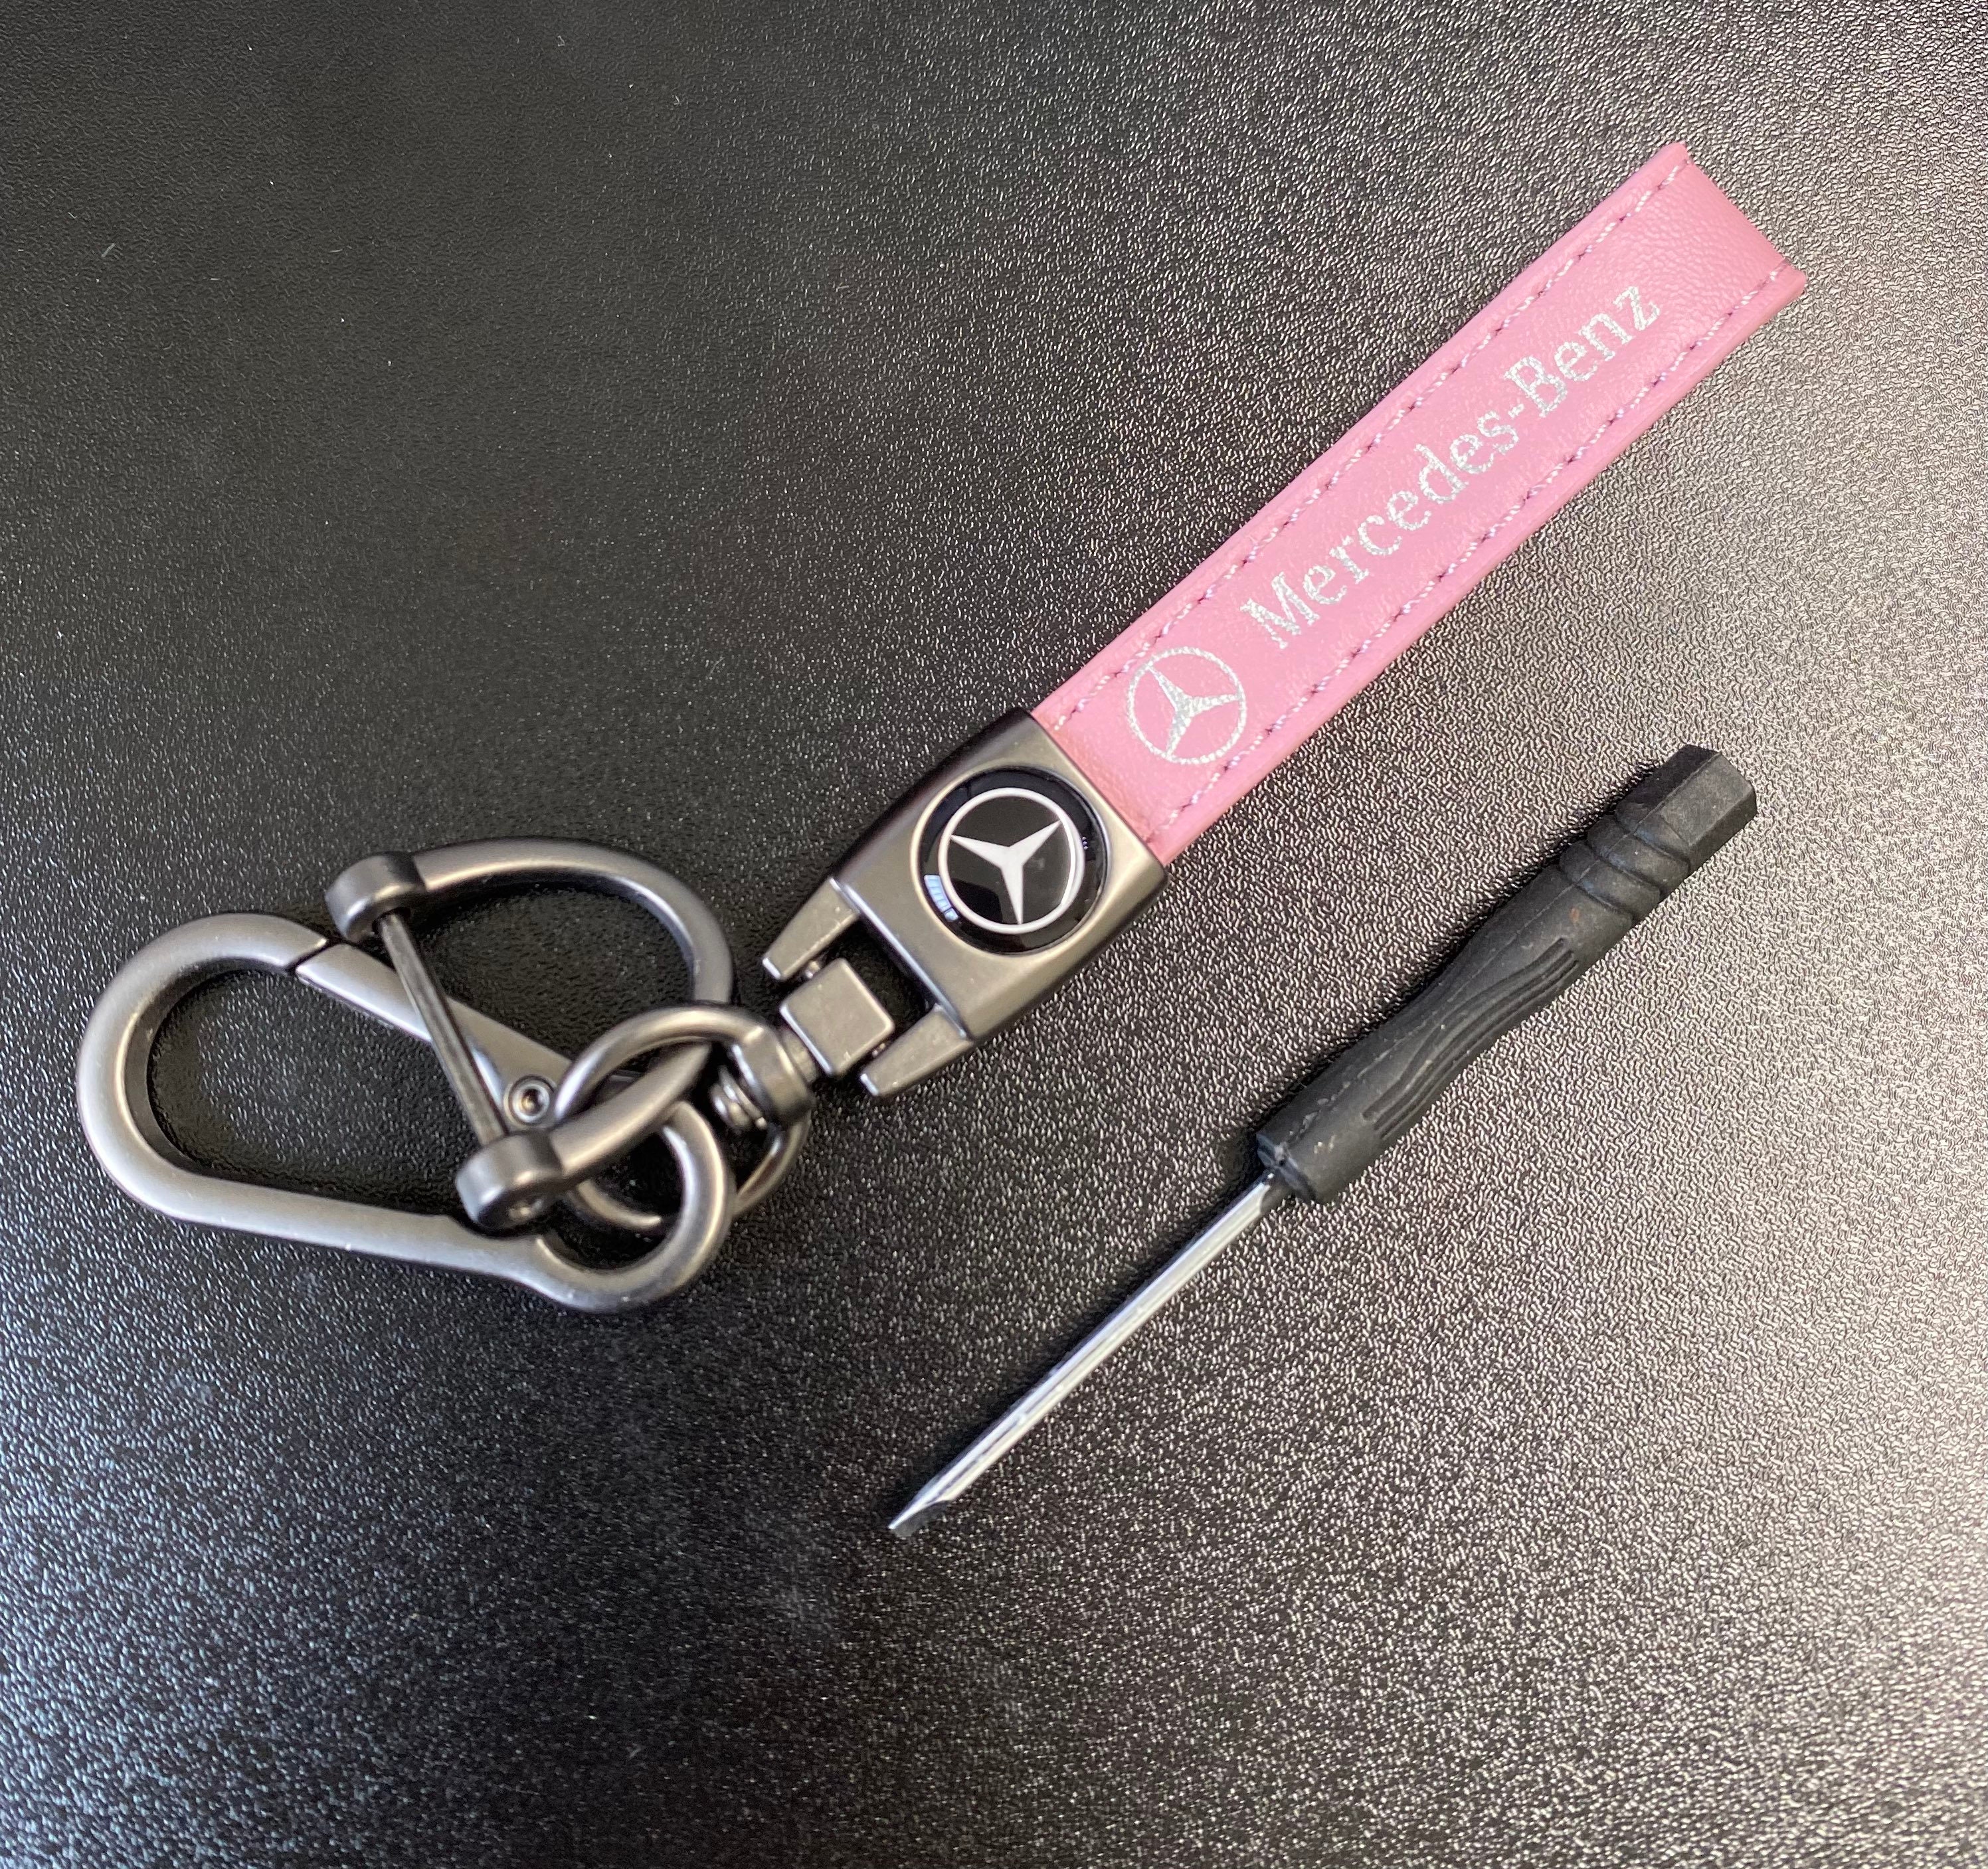 Leather Pink Key Chain Fits for Mercedes Benz A C E S Series, Glk